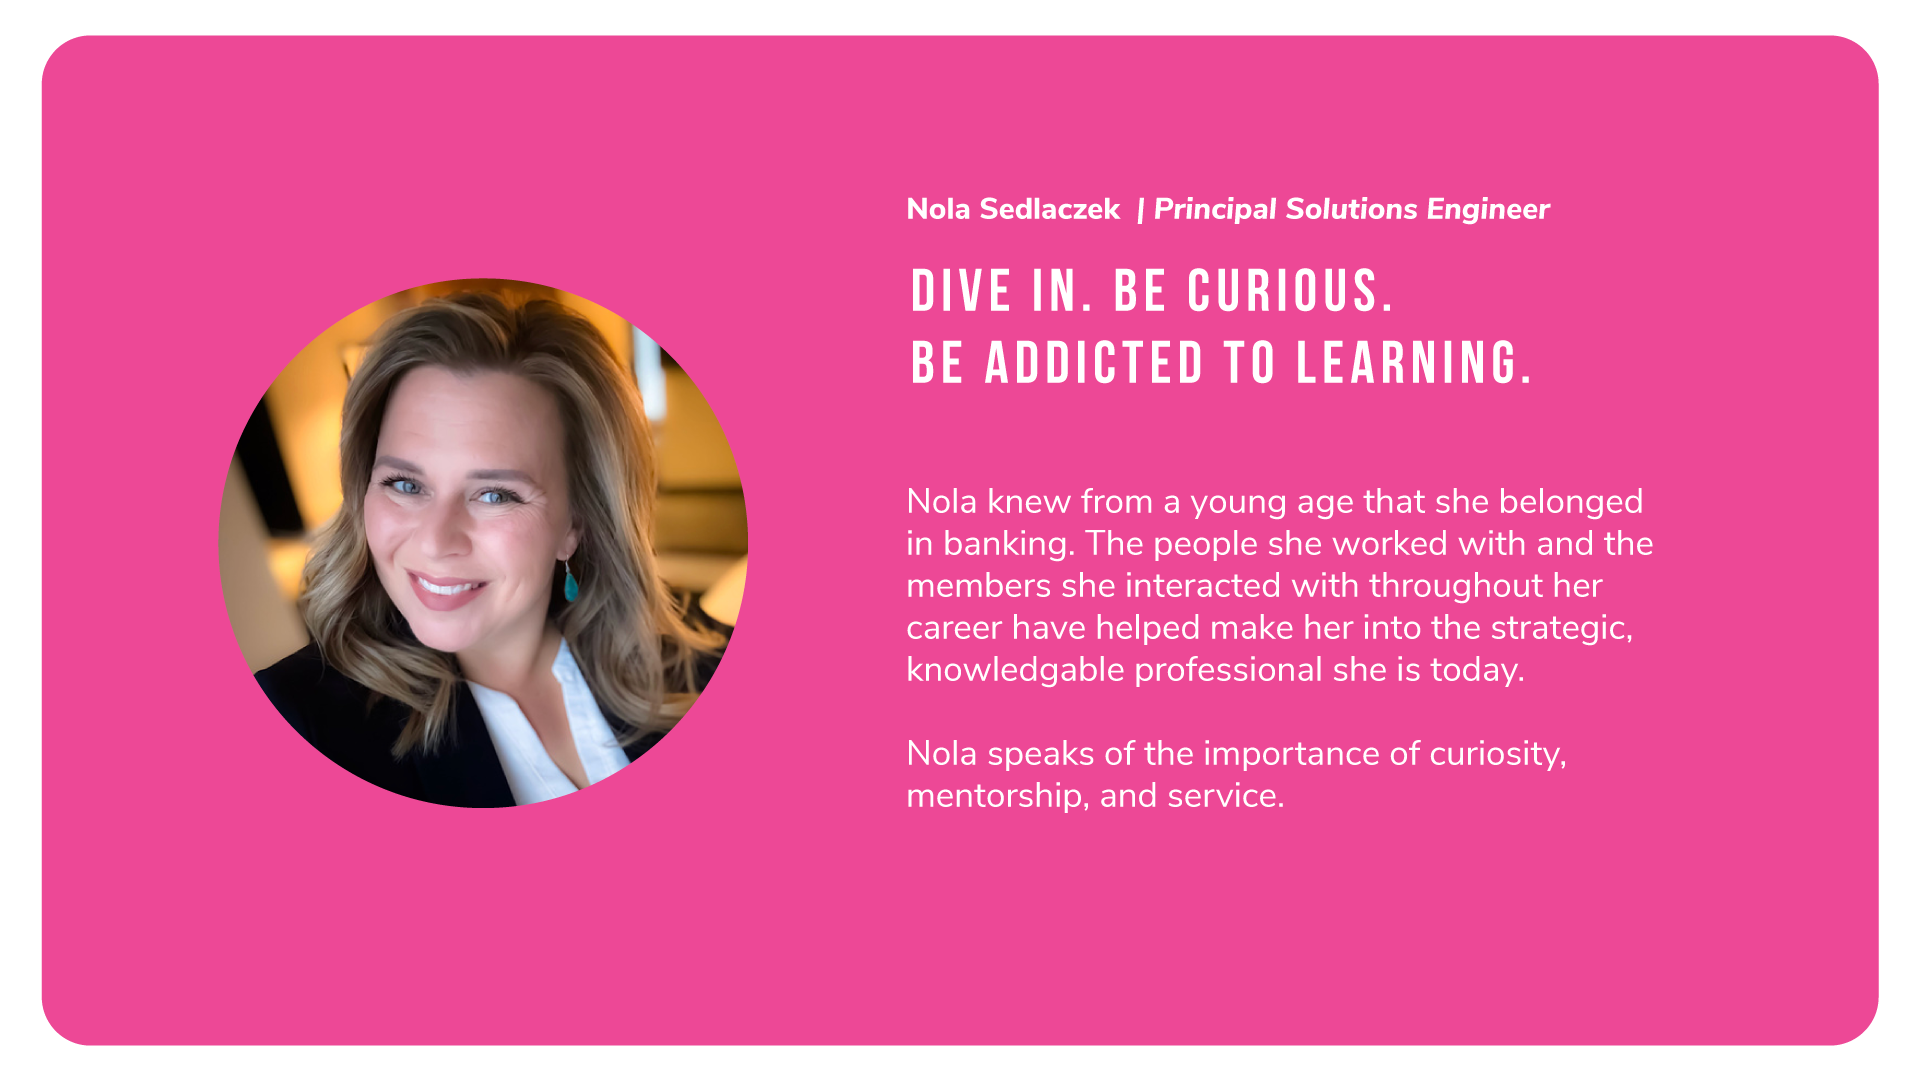 Nola Sedlaczek of Alkami says: Dive in. Be curious. Be addicted to learning.